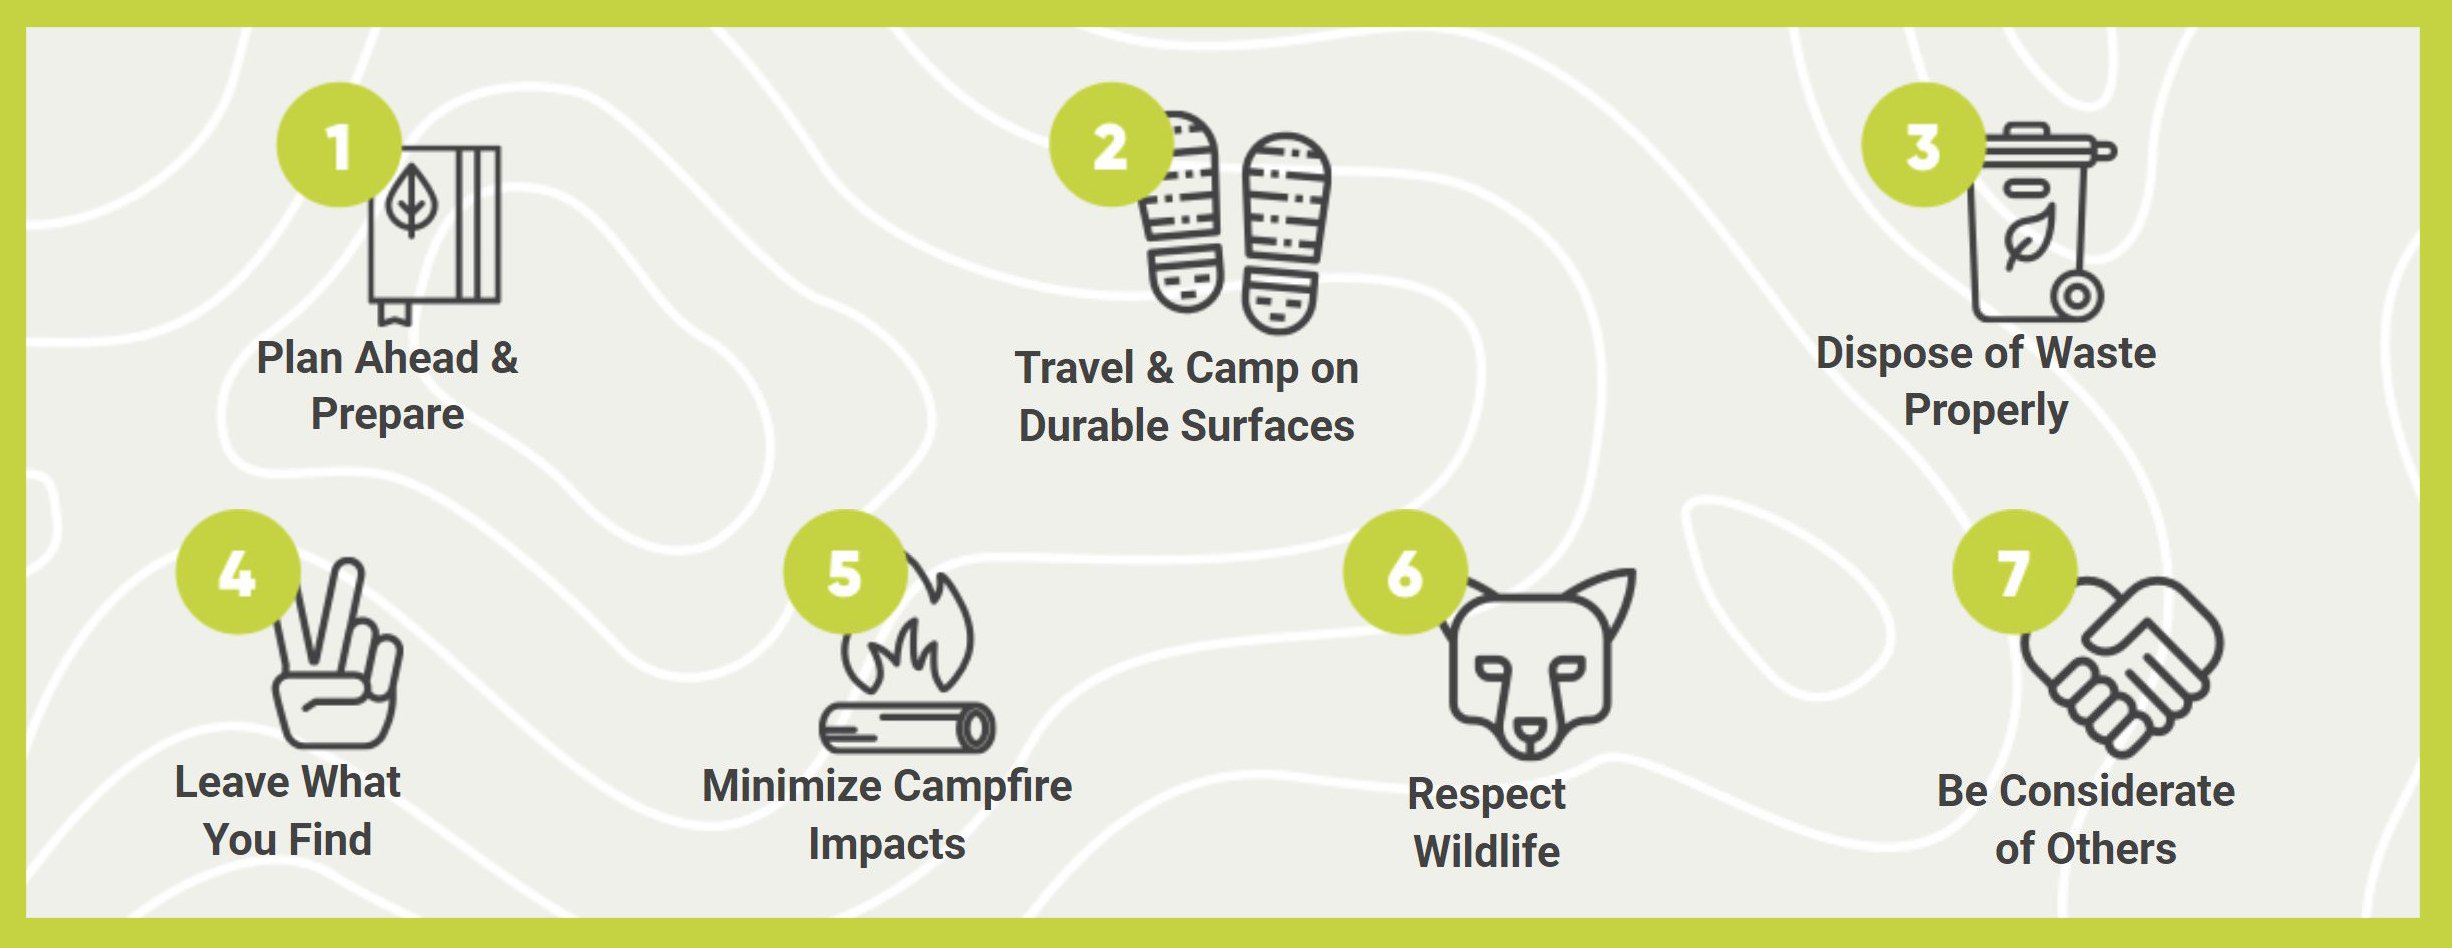 Seven principles of leave no trace for photographers adventure instead graphic.jpg